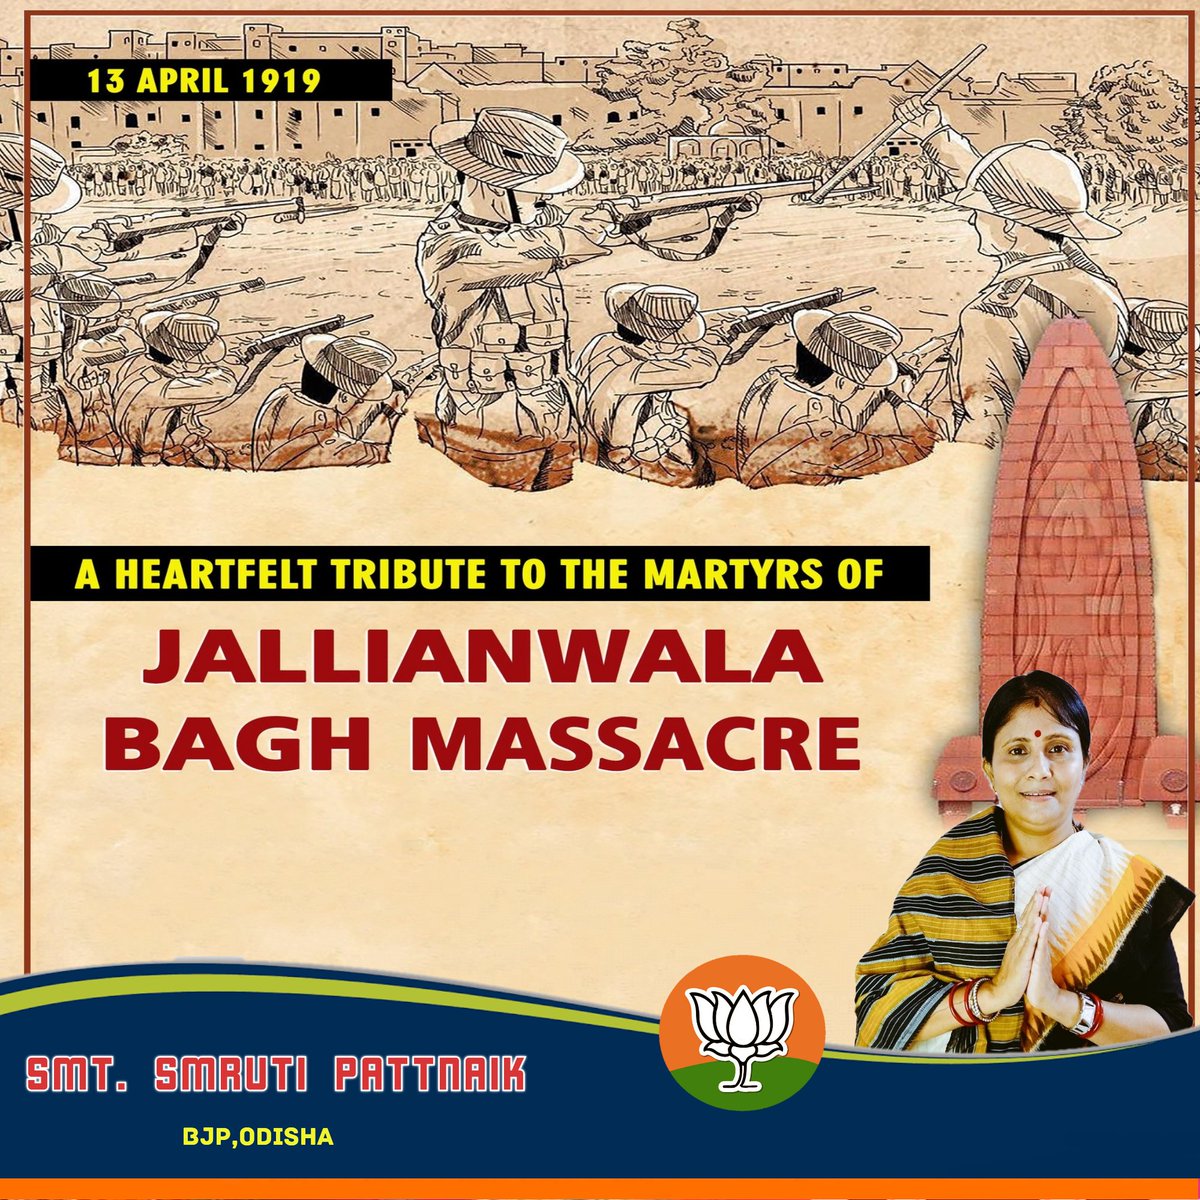 Solemn tributes to the martyrs of Jallianwala Bagh massacre. The valour and sacrifice of the great martyrs inspire every Indian and will forever be remembered. #JallianwalaBaghMassacre